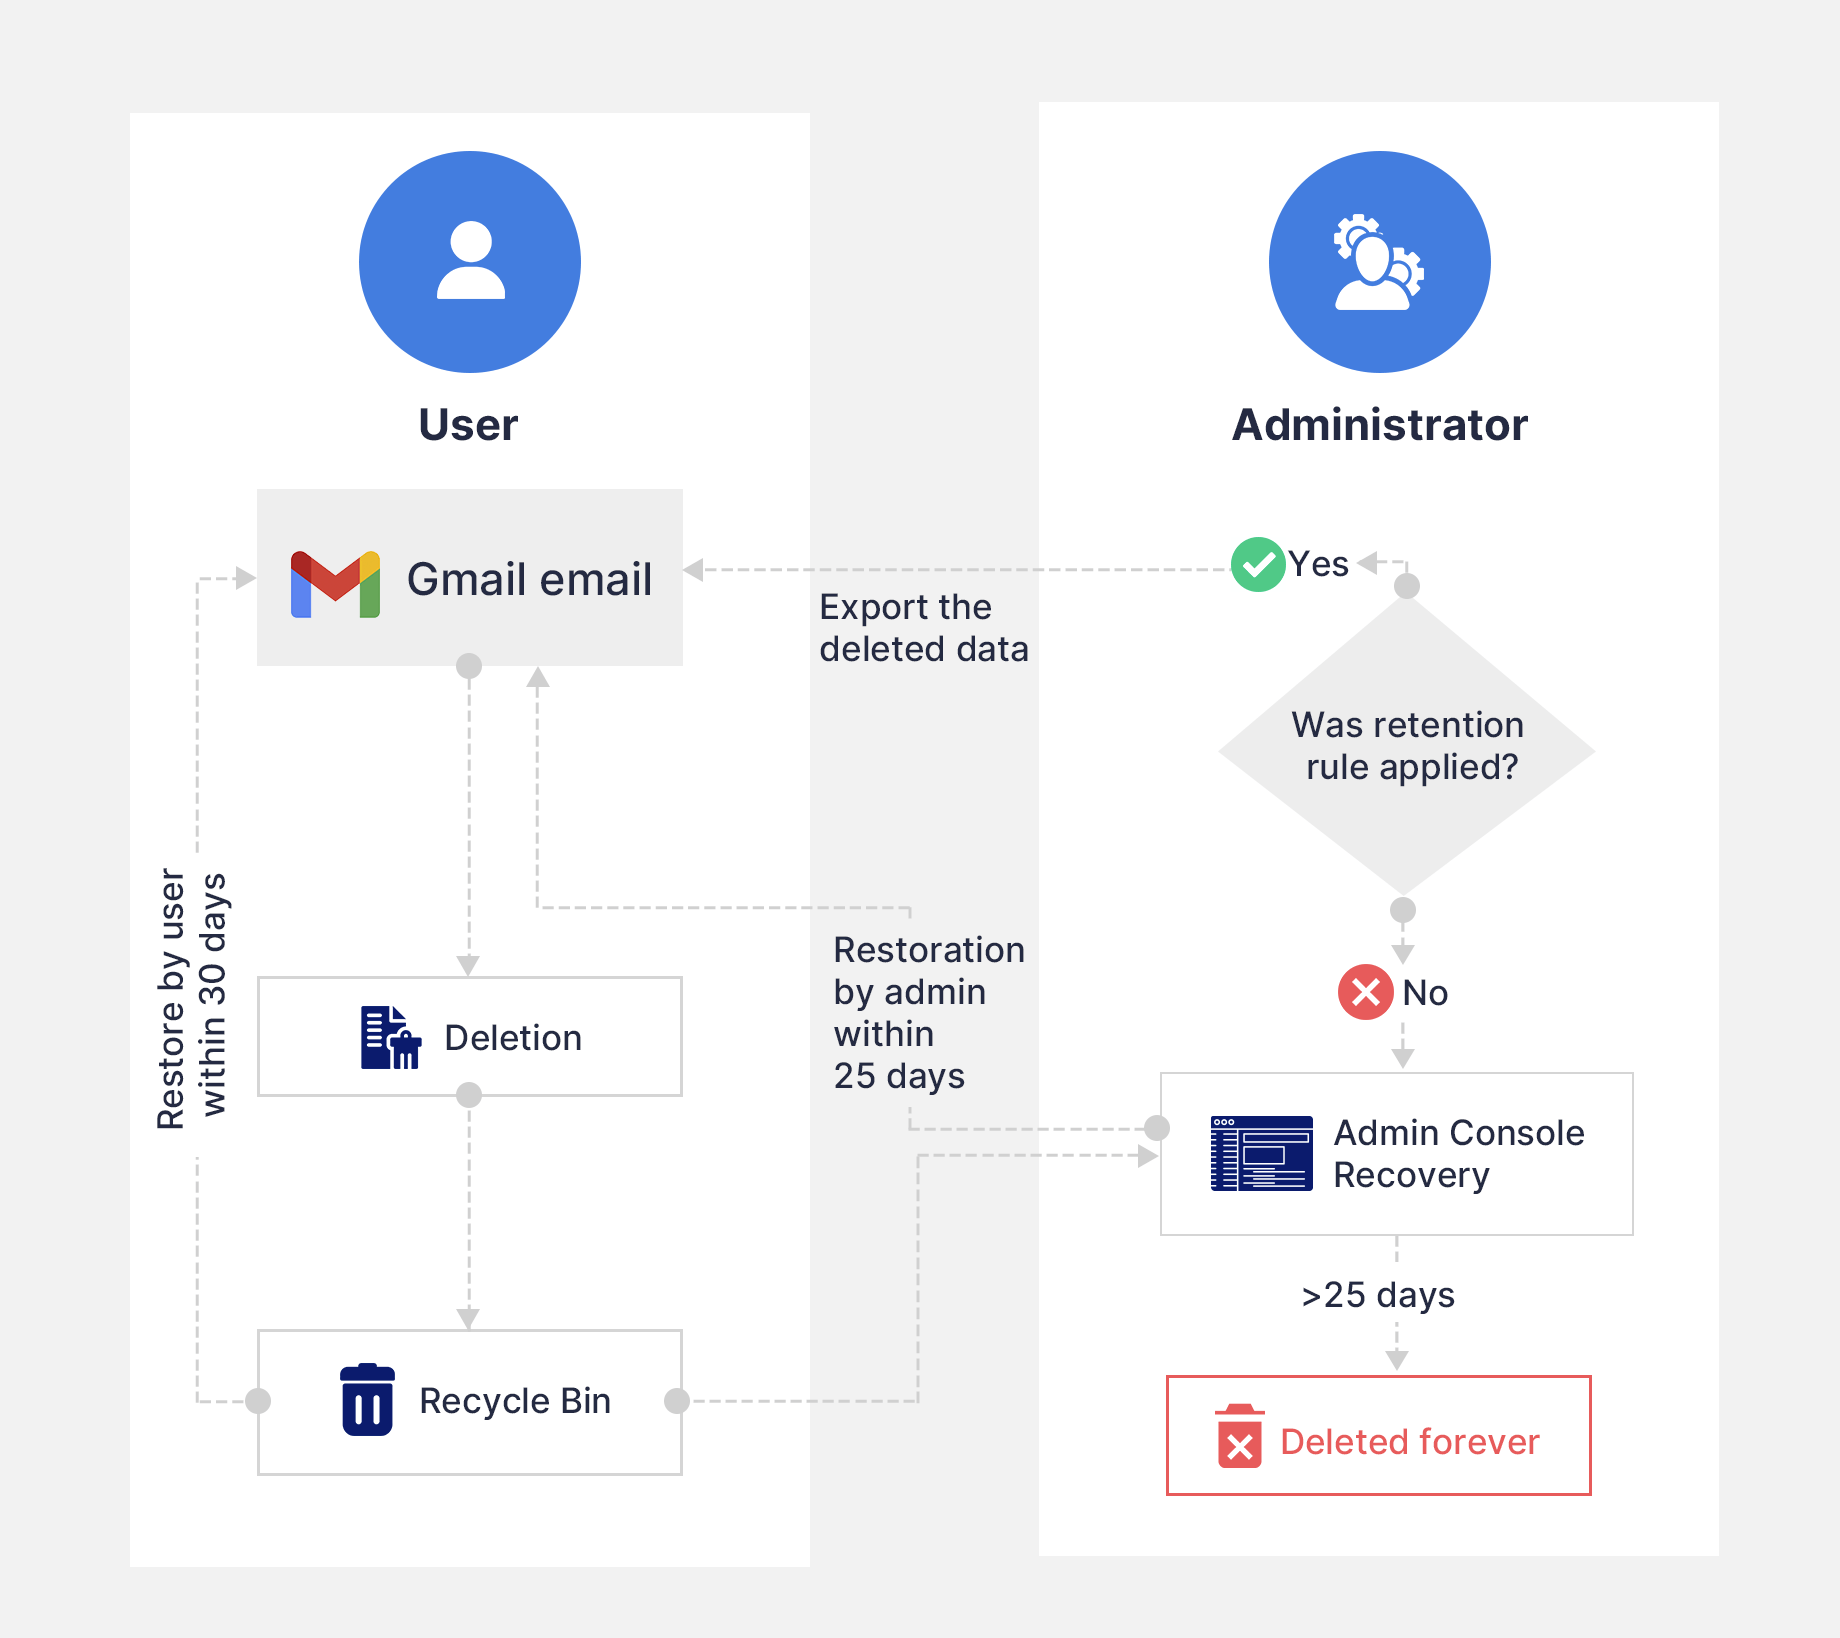 Gmail email deletion without retention